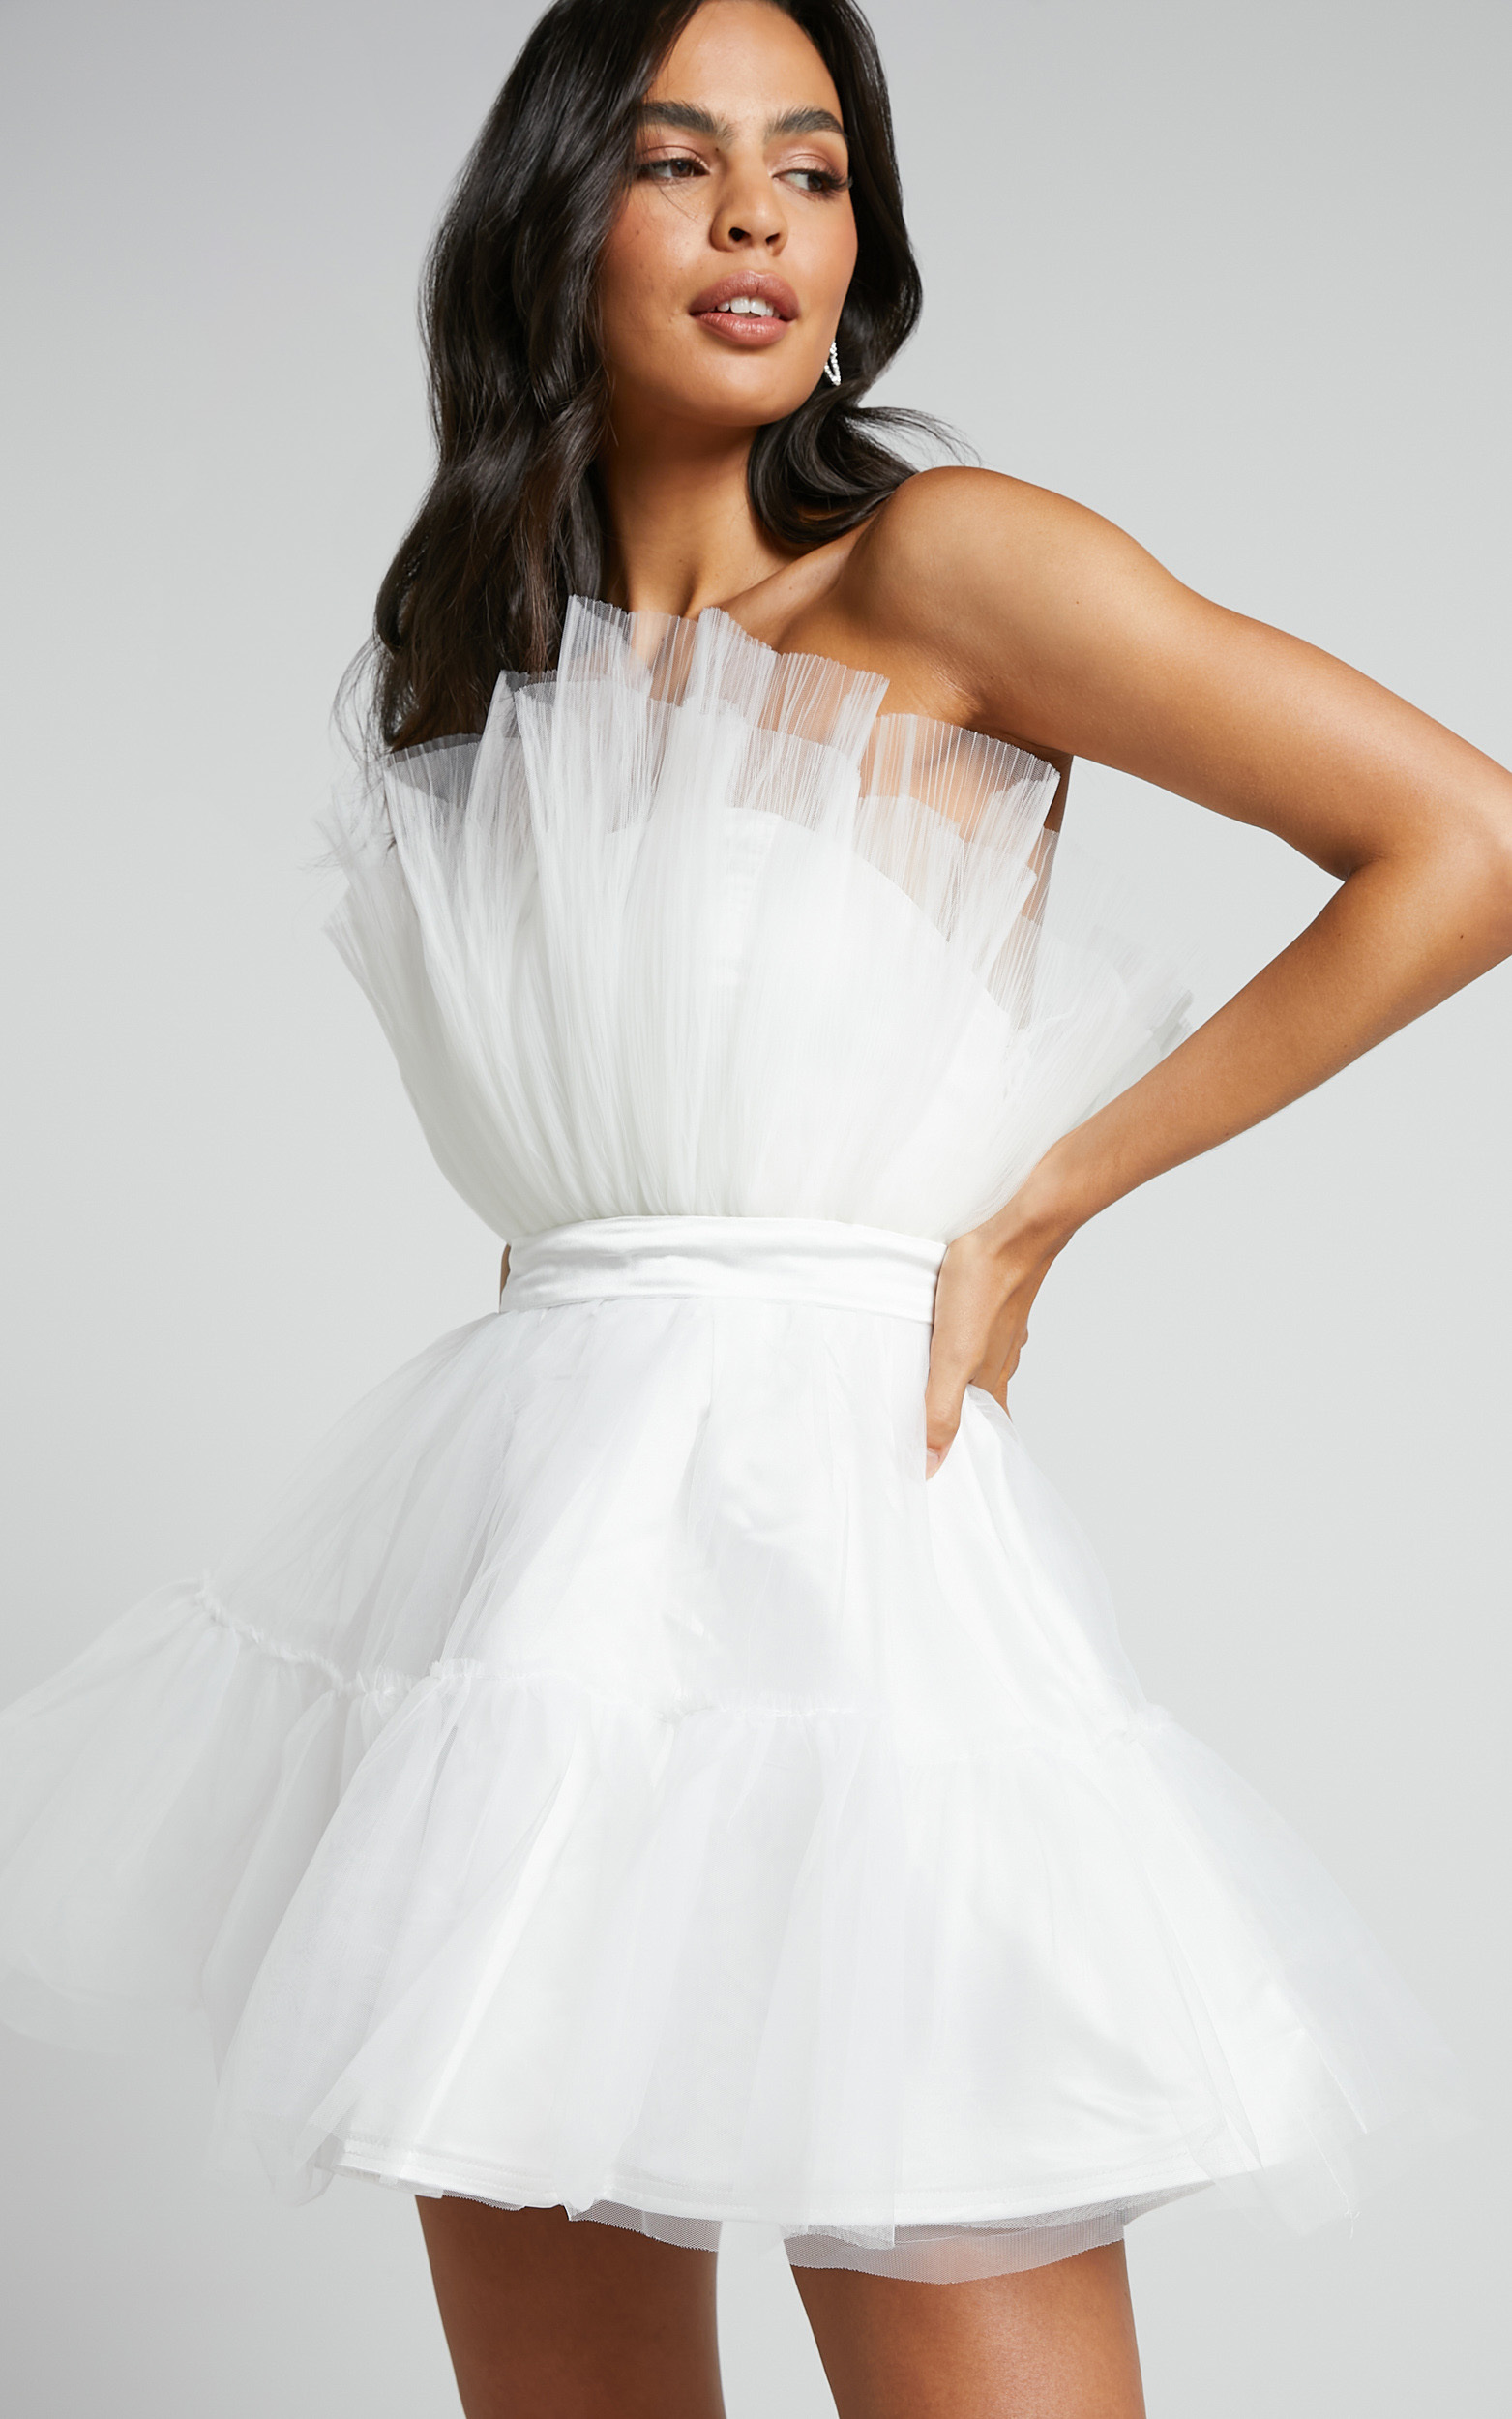 Amalya Mini Dress - Tiered Tulle Fit and Flare Dress in White - 04, WHT1, hi-res image number null